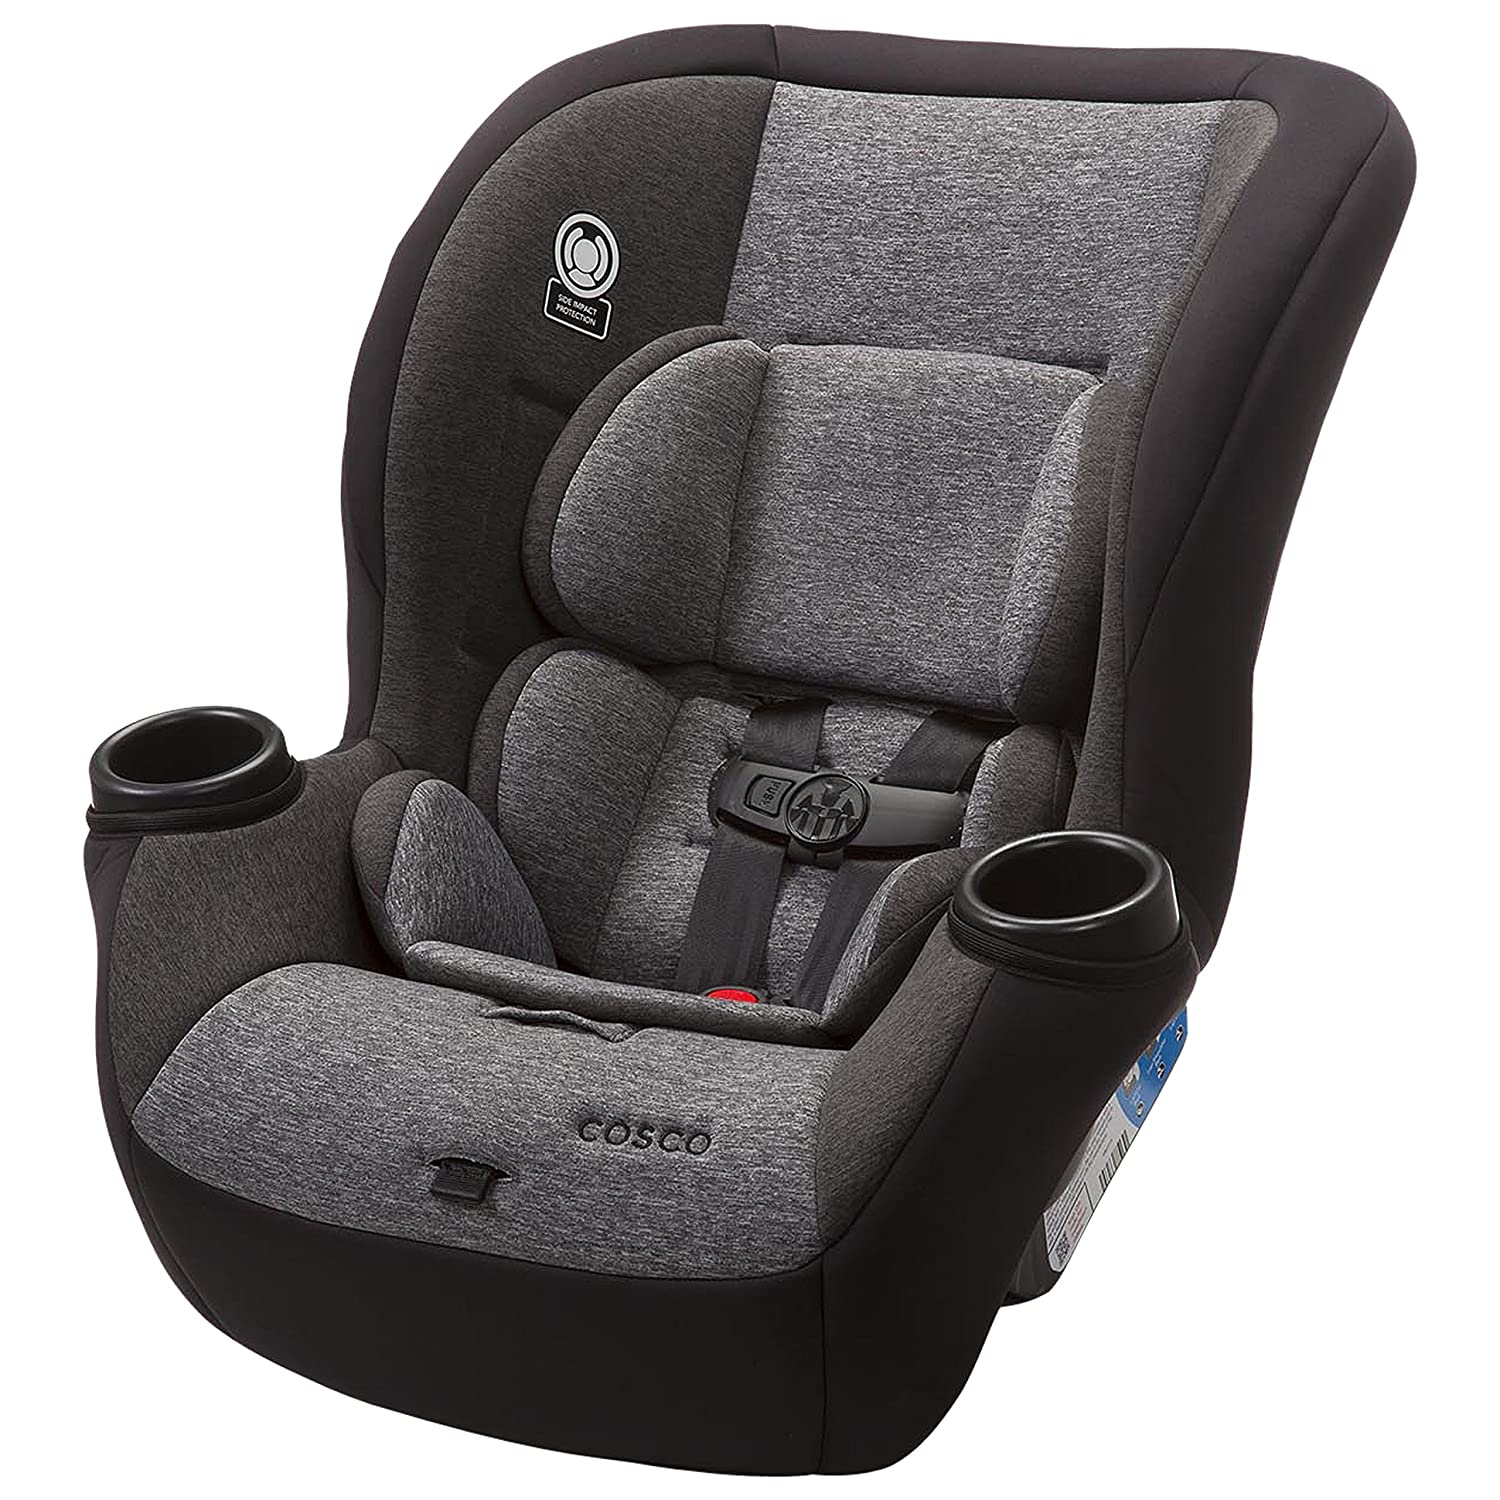 Top 5 Best Affordable Convertible Car Seats Reviews in 2022 5